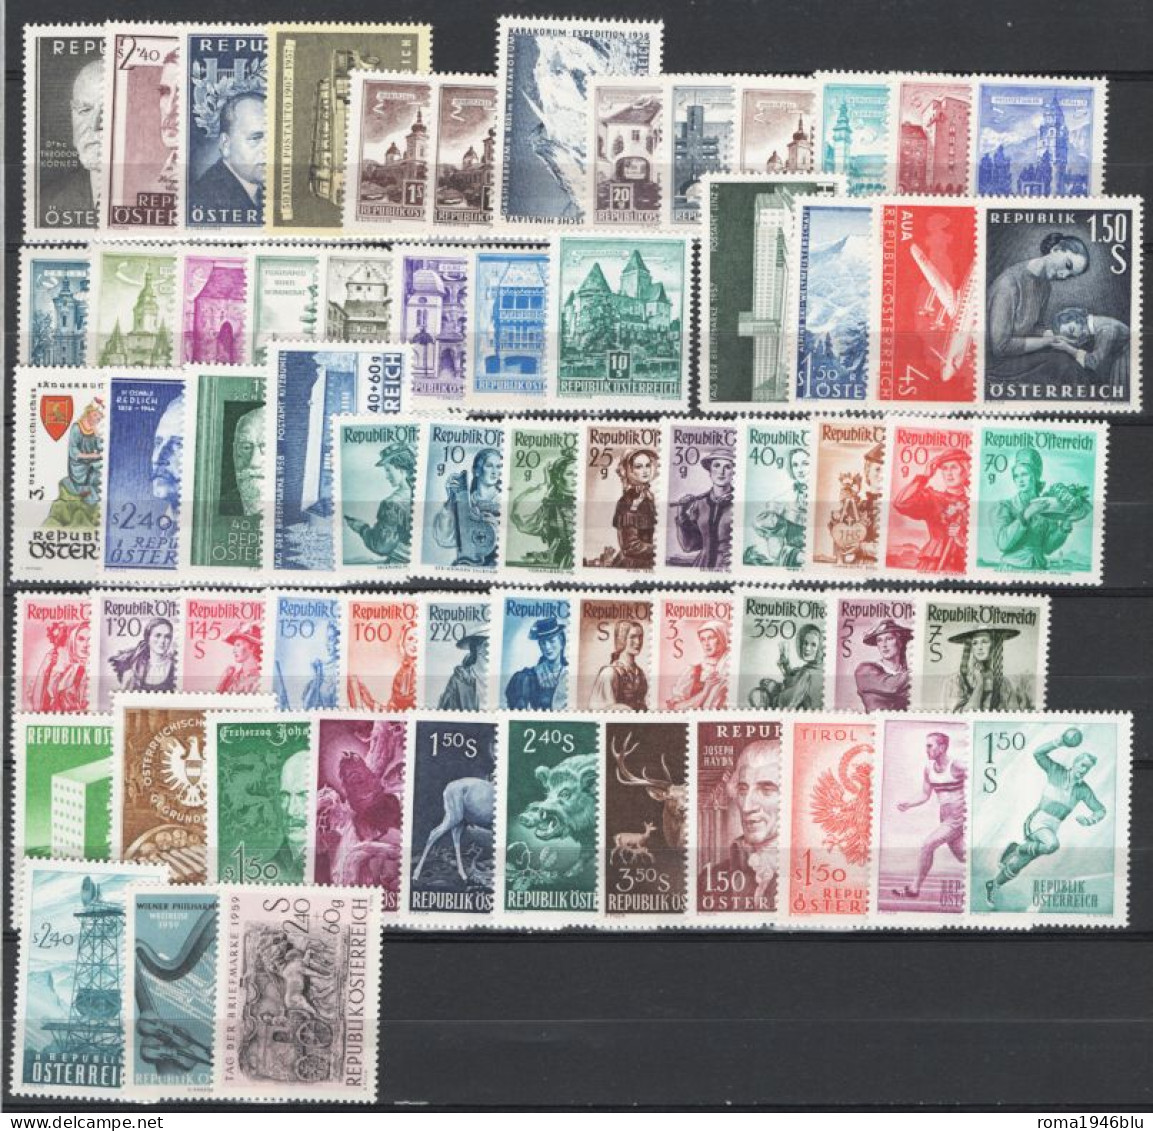 Austria 1957/59 Annate Complete / Complete Year Set **/MNH VF - Full Years